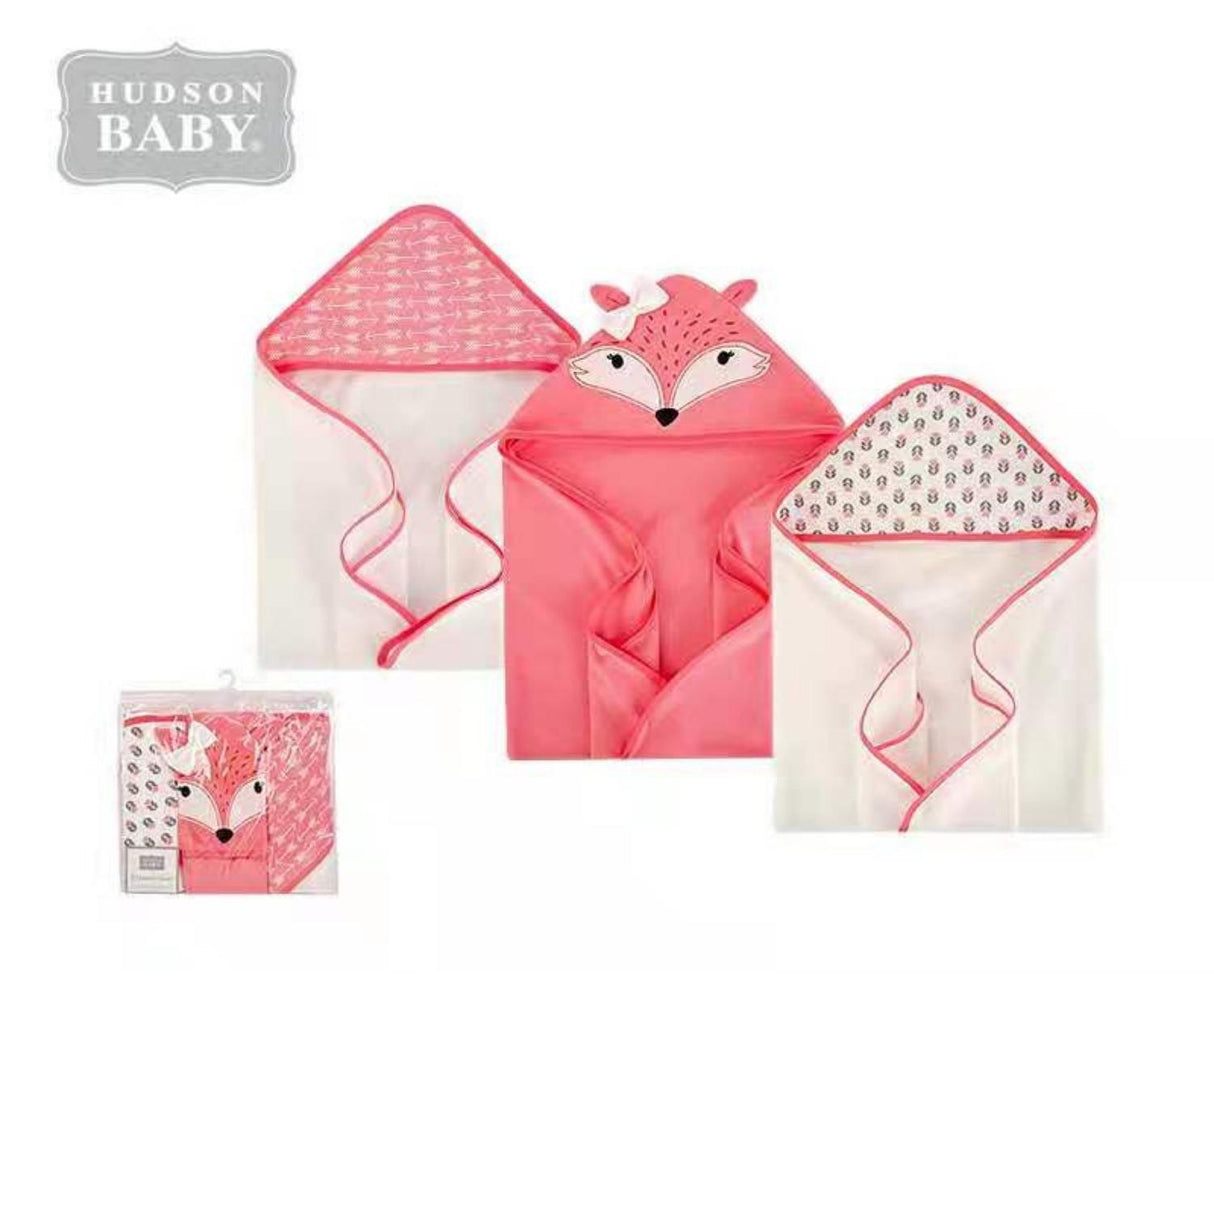 Hudson Baby Comfy Pack Of 3 Hooded Towel